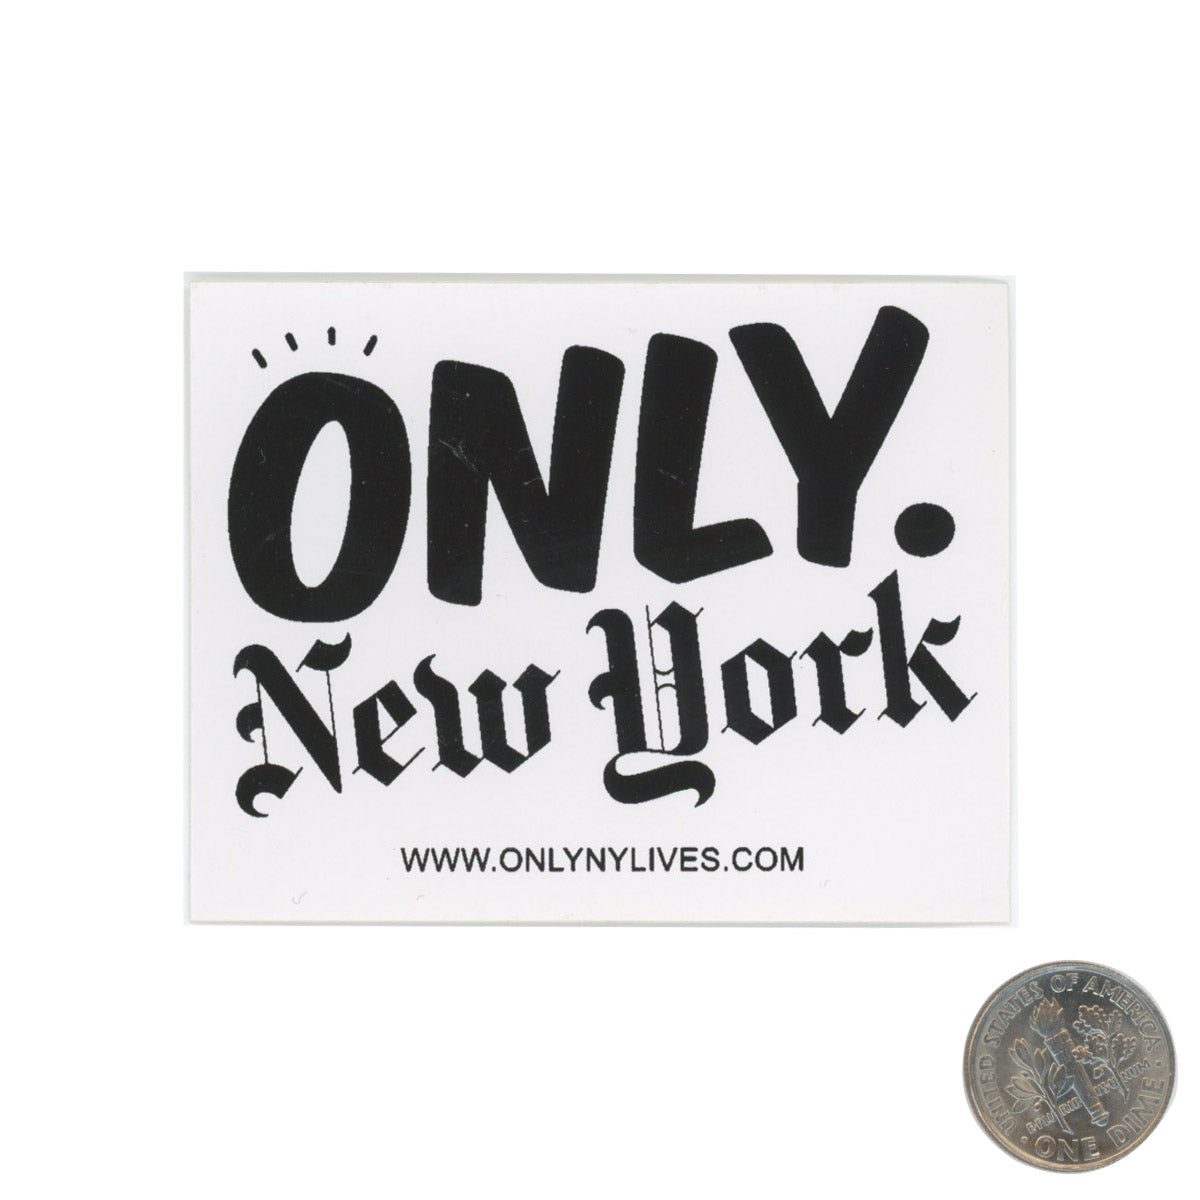 ONLY NEW YORK Black White Sticker with dime